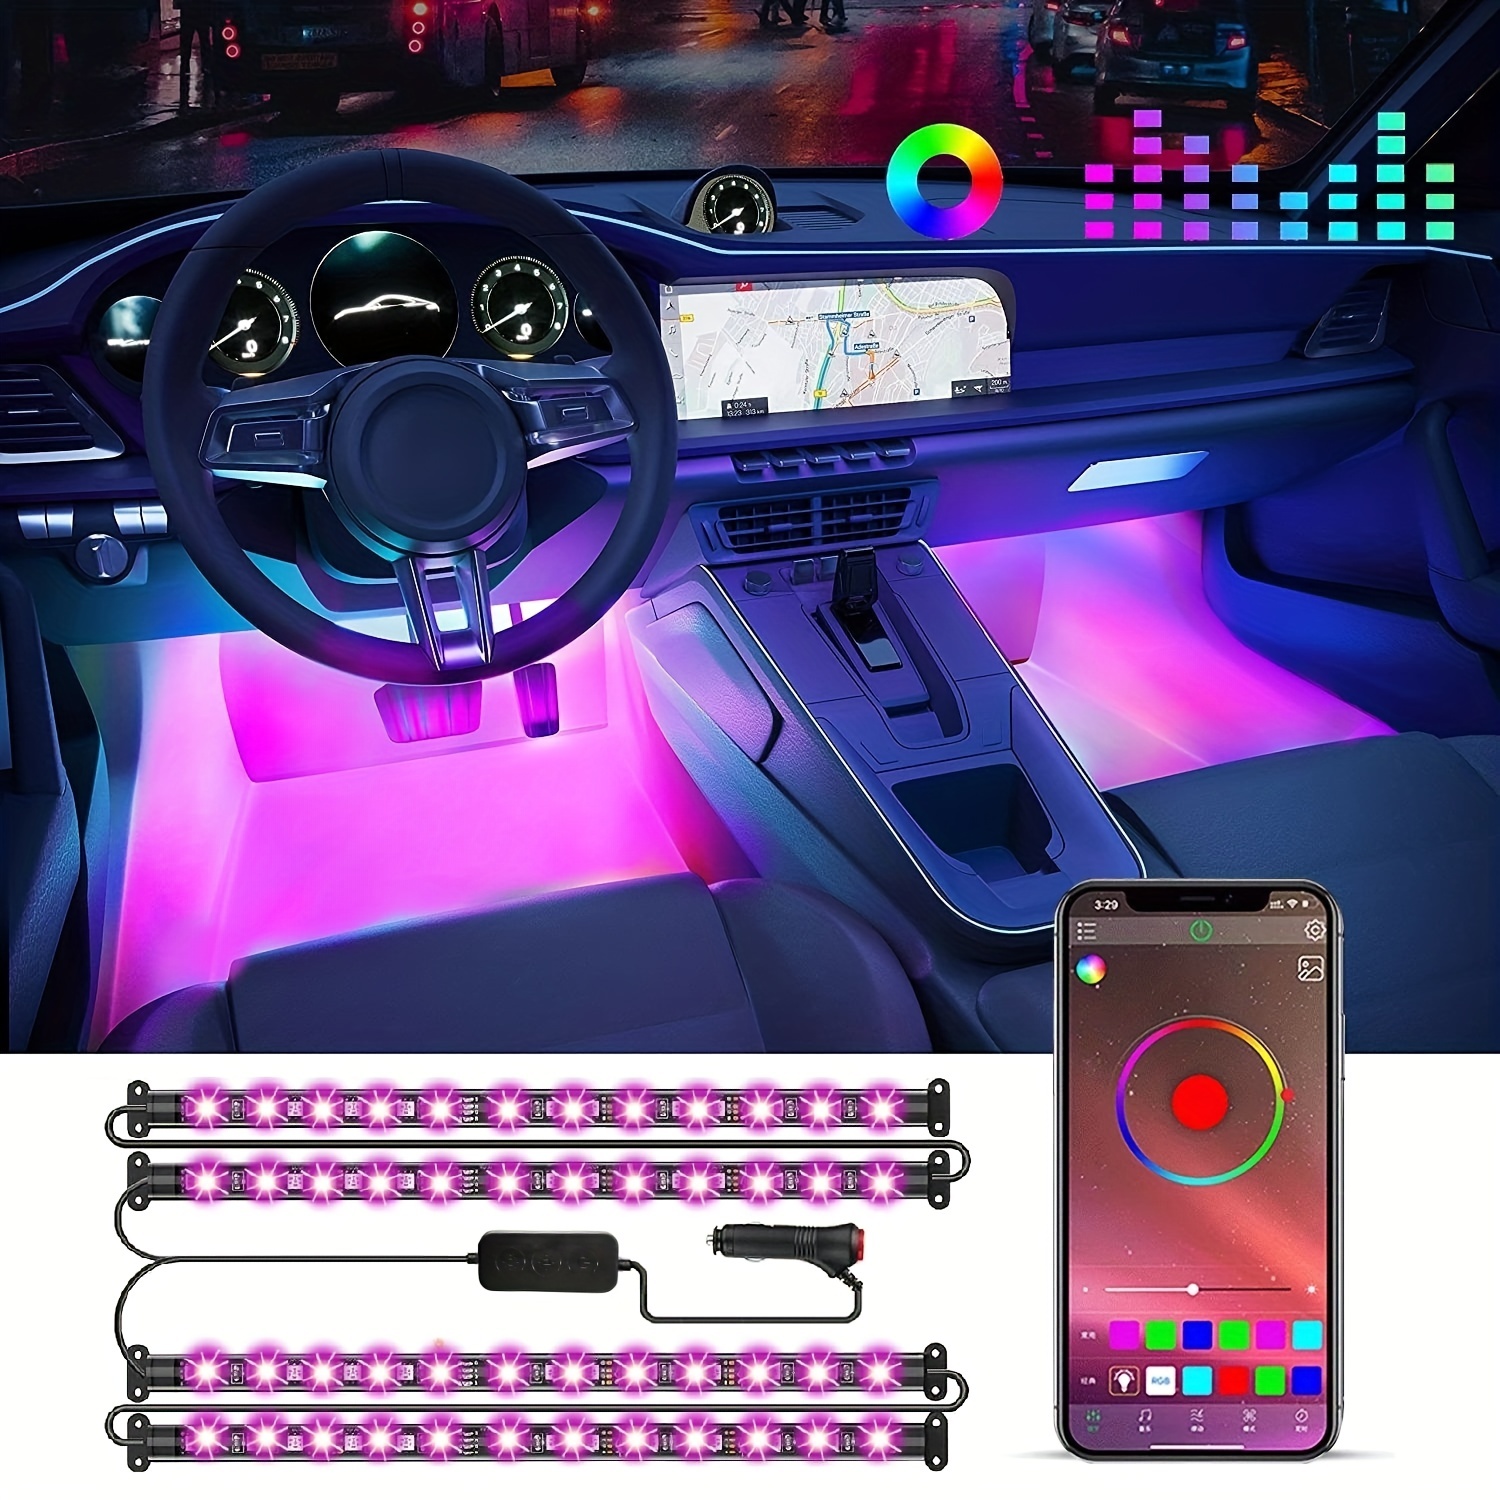 4pcs Interior Car Lights ,Car LED Lights, Car Accessories ,Smart APP  Control With Remote Control, Music Sync Color Change ,RGB Inside Car Lights  With